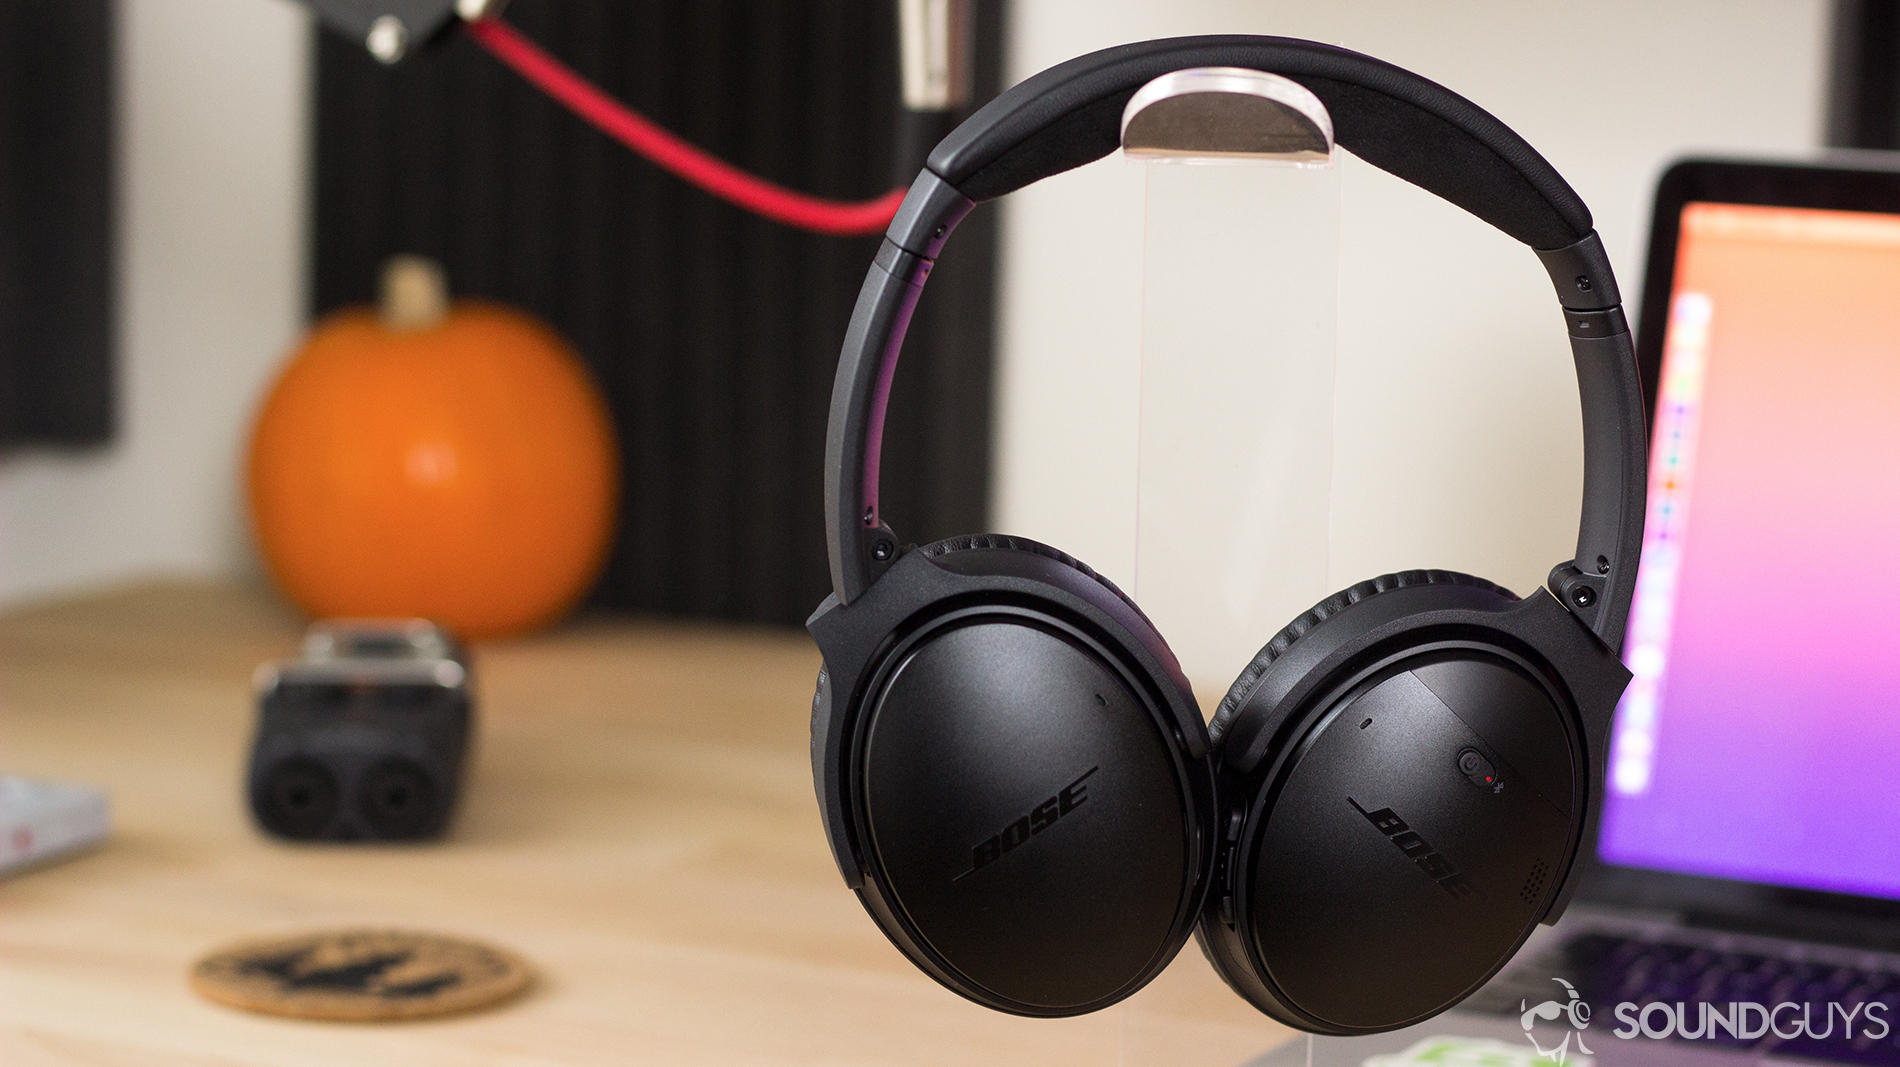 The Bose QuietComfort 35 II headphones on a headphone stand in front of a computer and pumpkin.